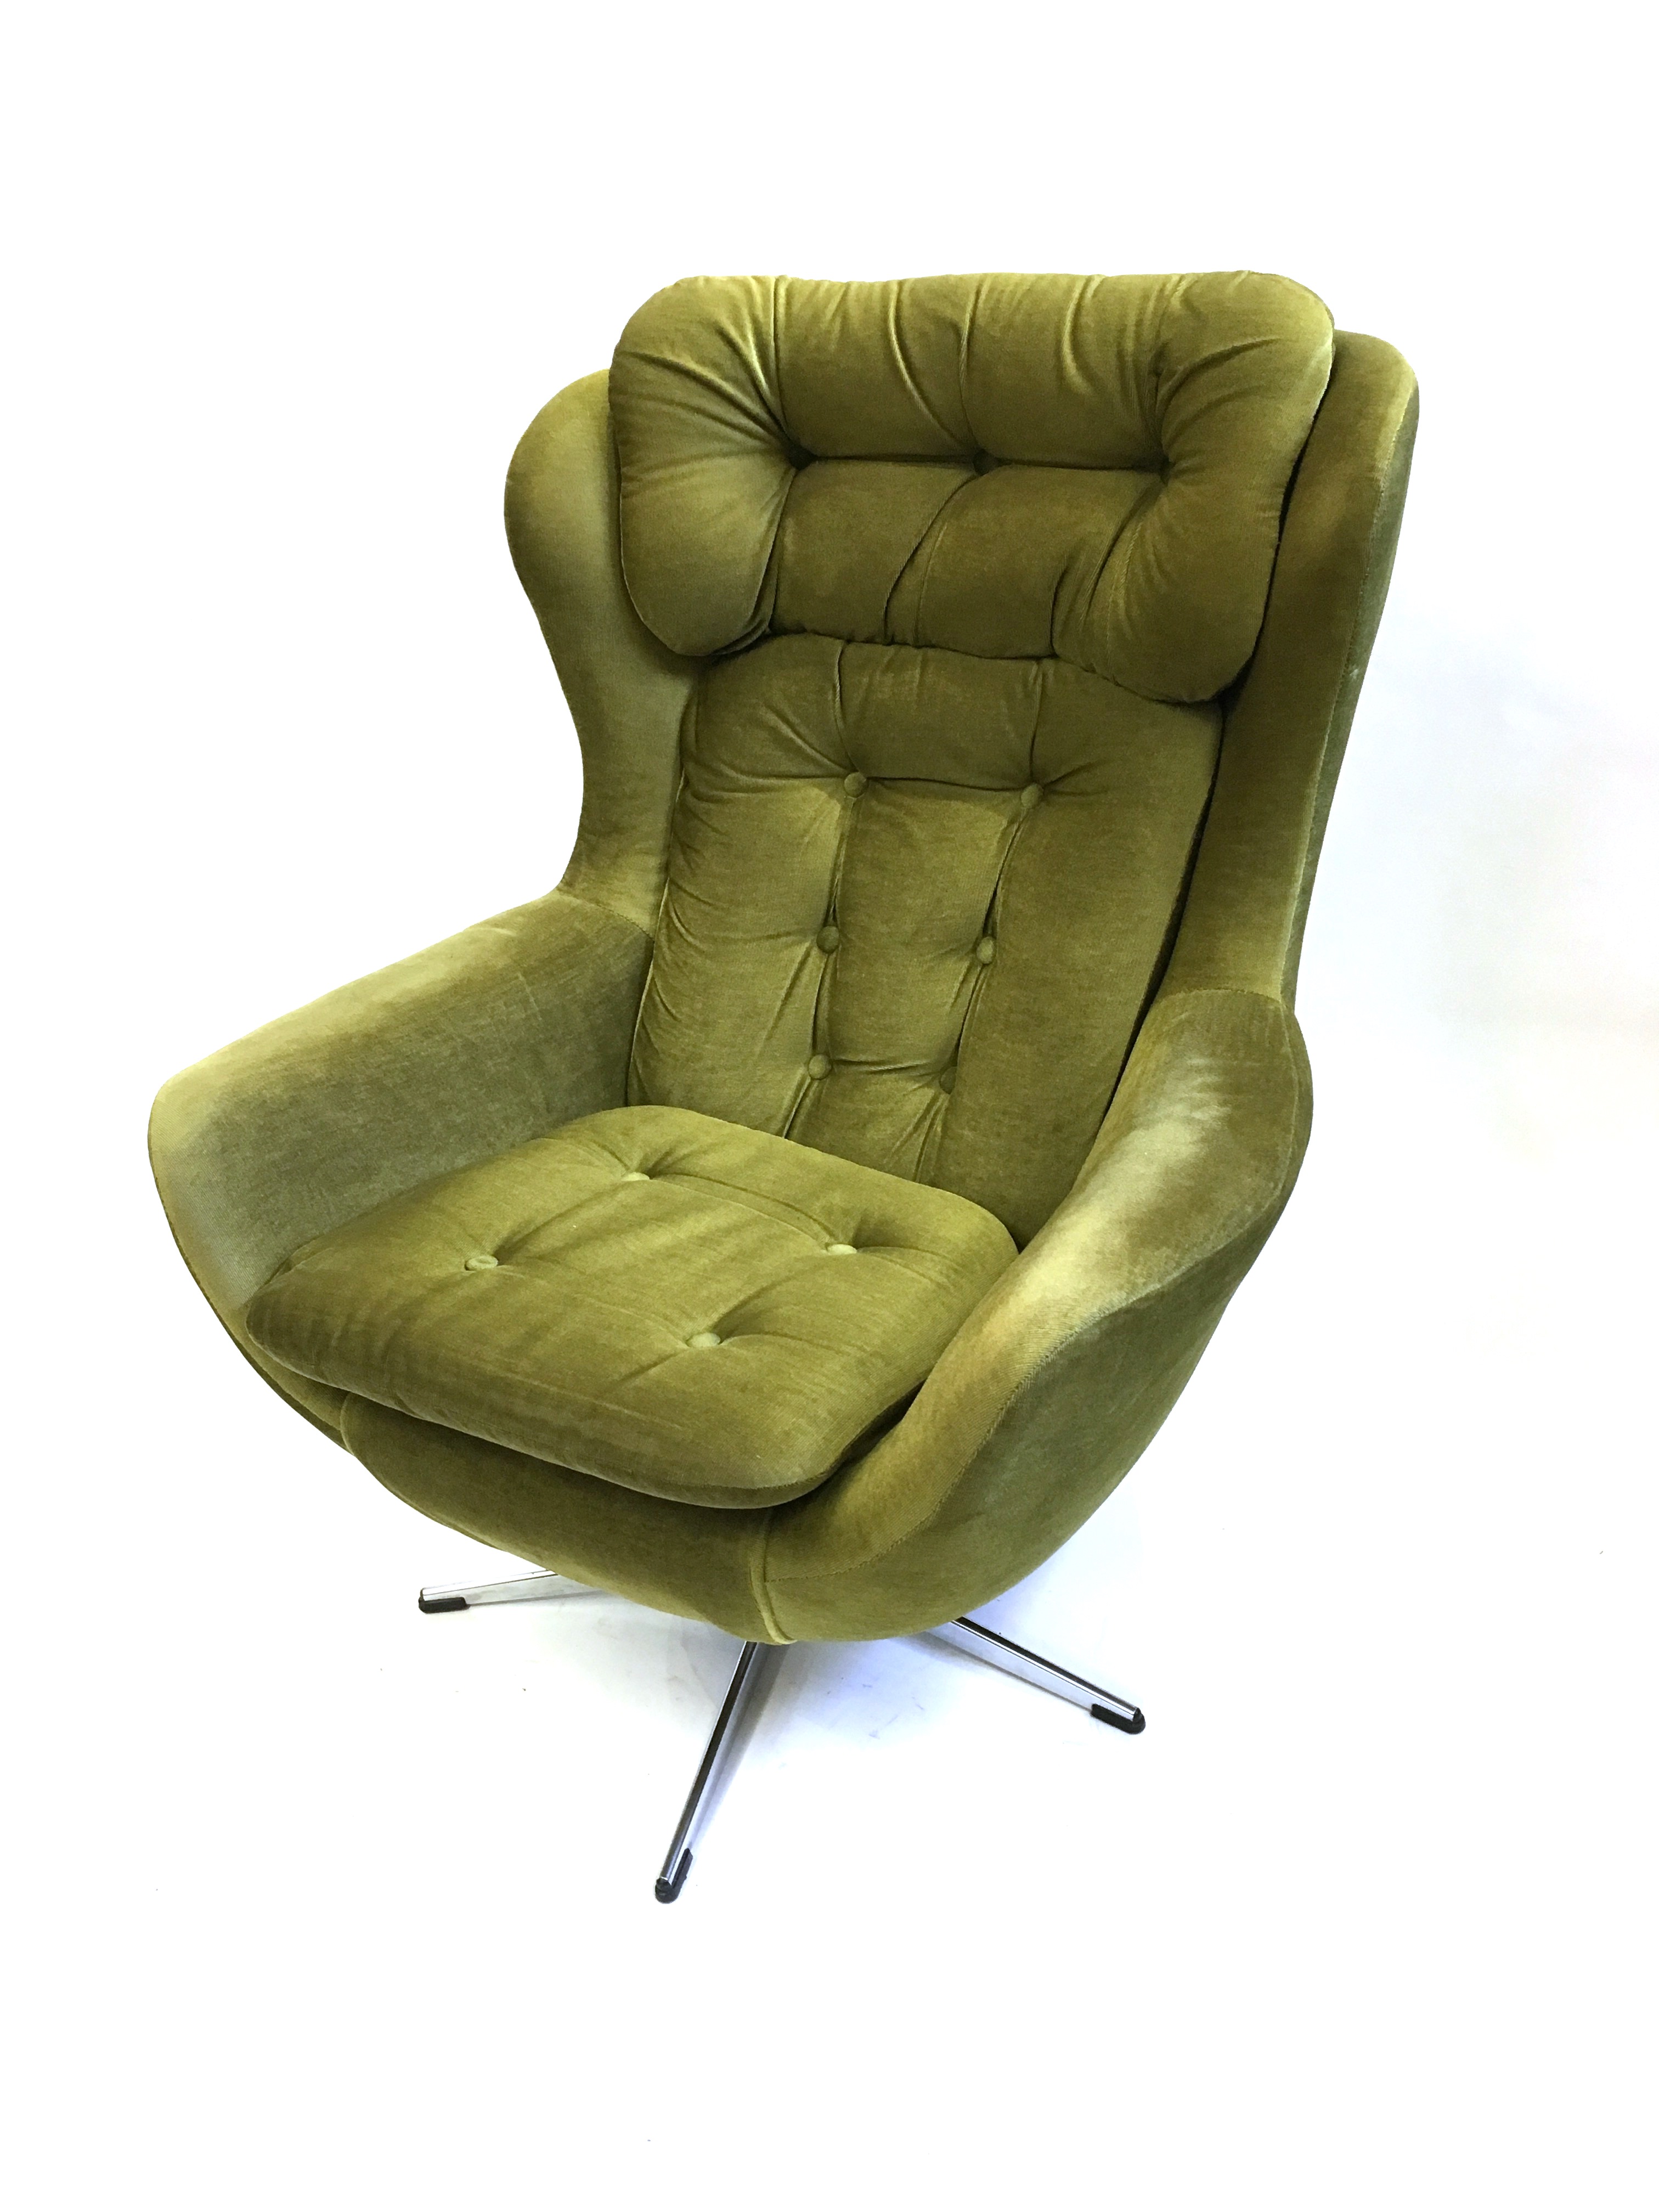 A 1970S SWIVEL ARMCHAIR with green button upholstery on chrome five prong base